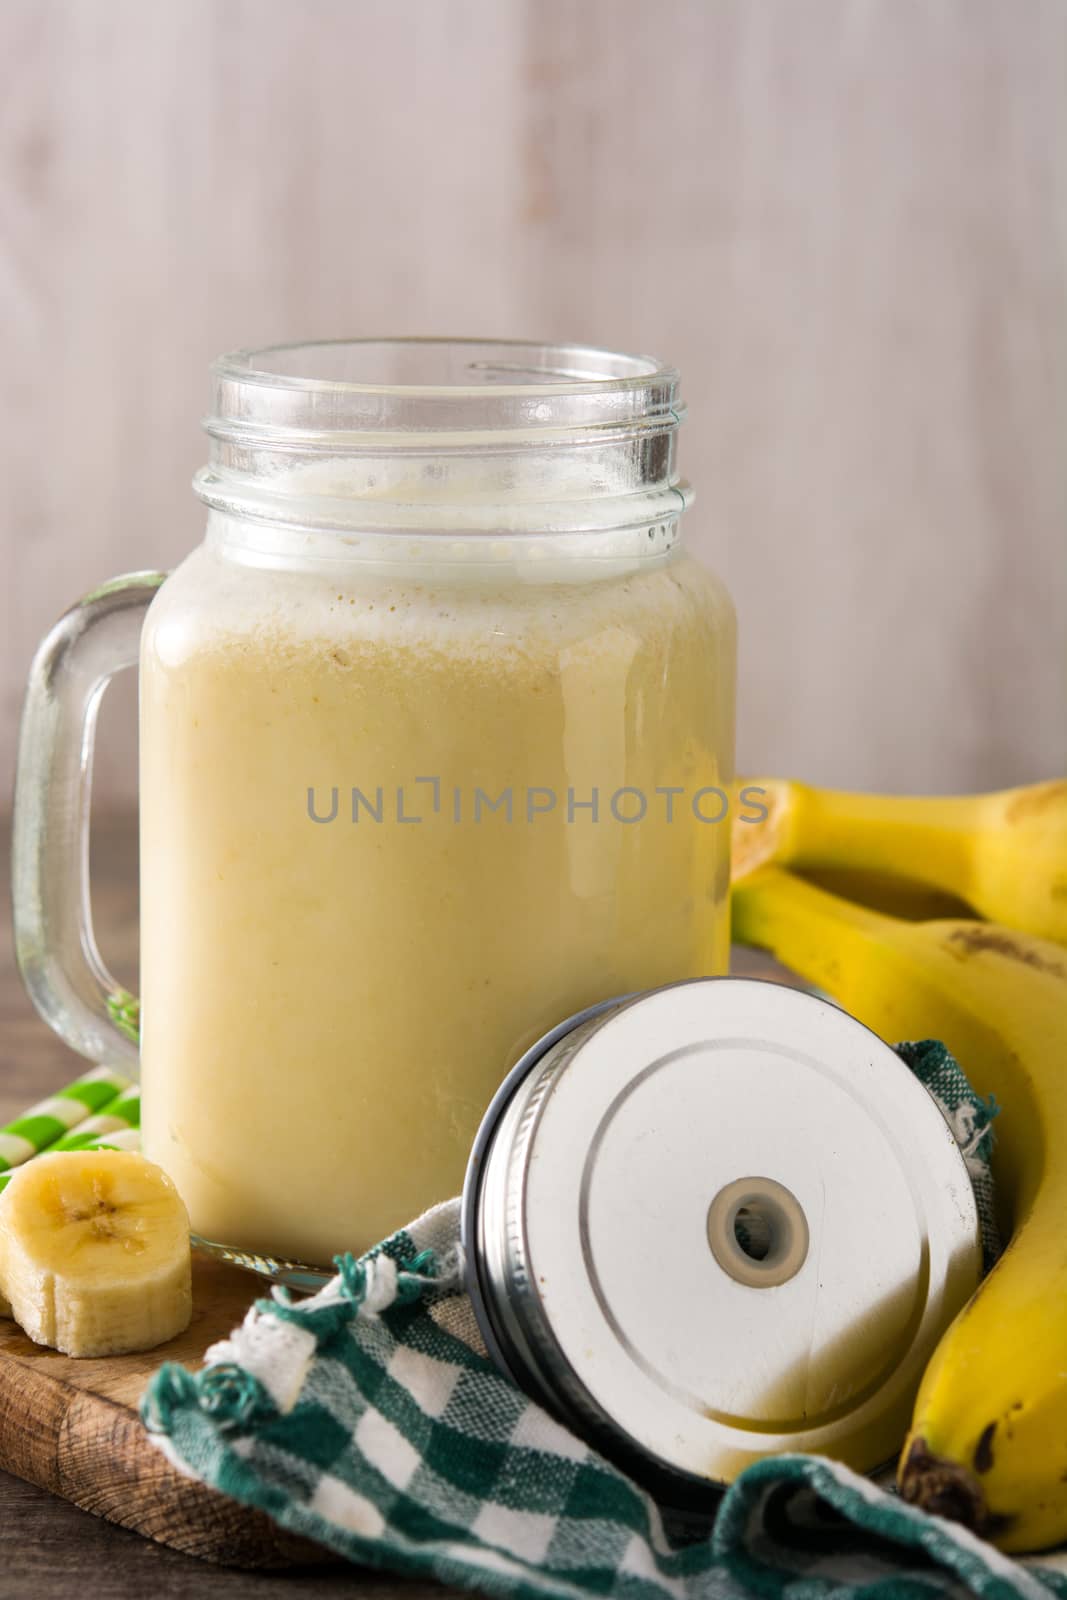 Banana smoothie in jar by chandlervid85